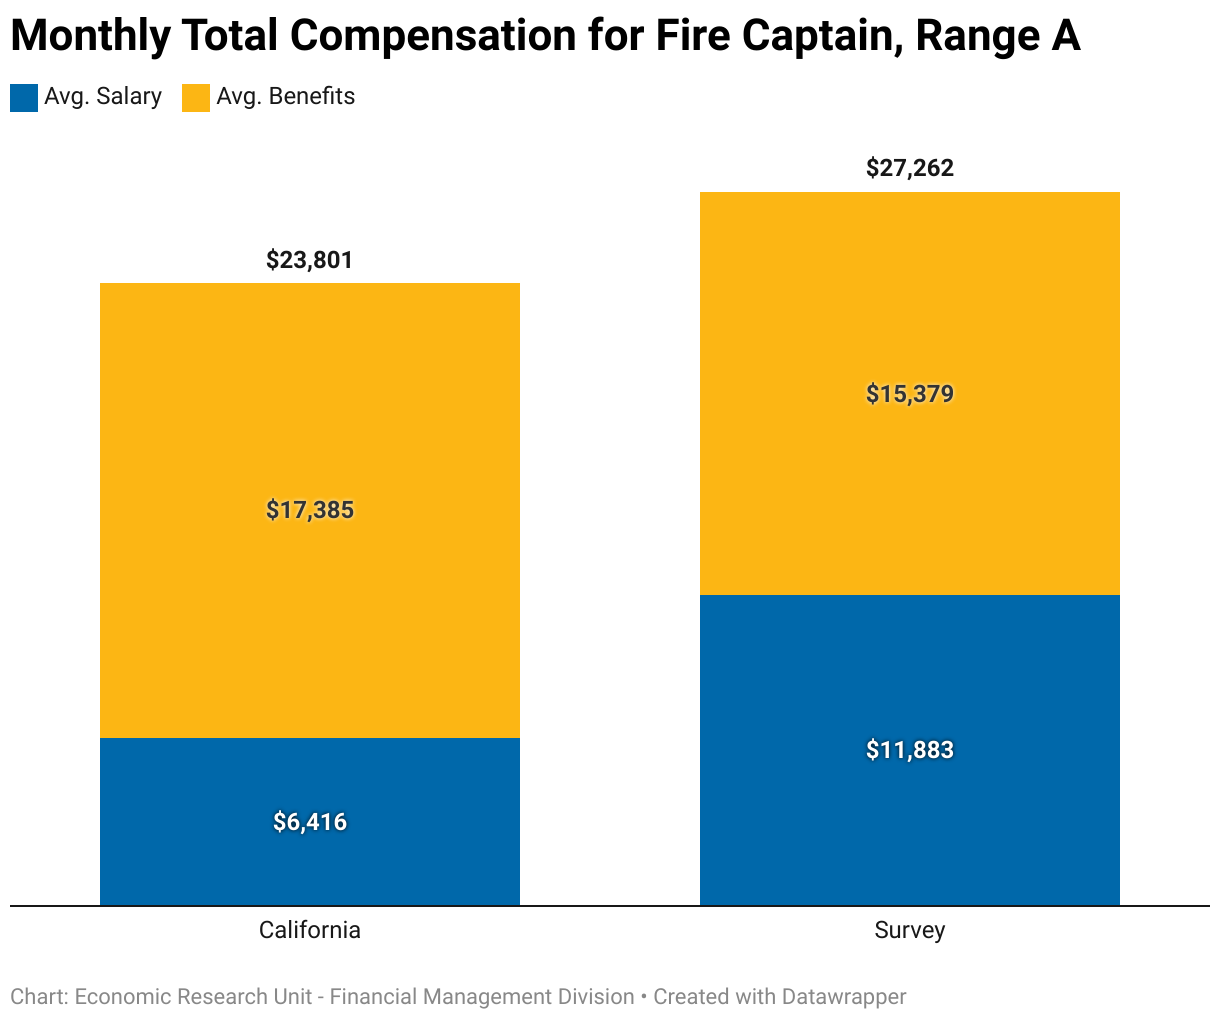 This chart compares the average monthly compensation for Fire Captain, Range A across State and local firefighters. The average monthly compensation for State firefighters was $23,801 ($6,416 in salary and $17,385 in benefits). The average monthly compensation for local fighters was $27,262 ($11,883 in salary and $15,379 in benefits).